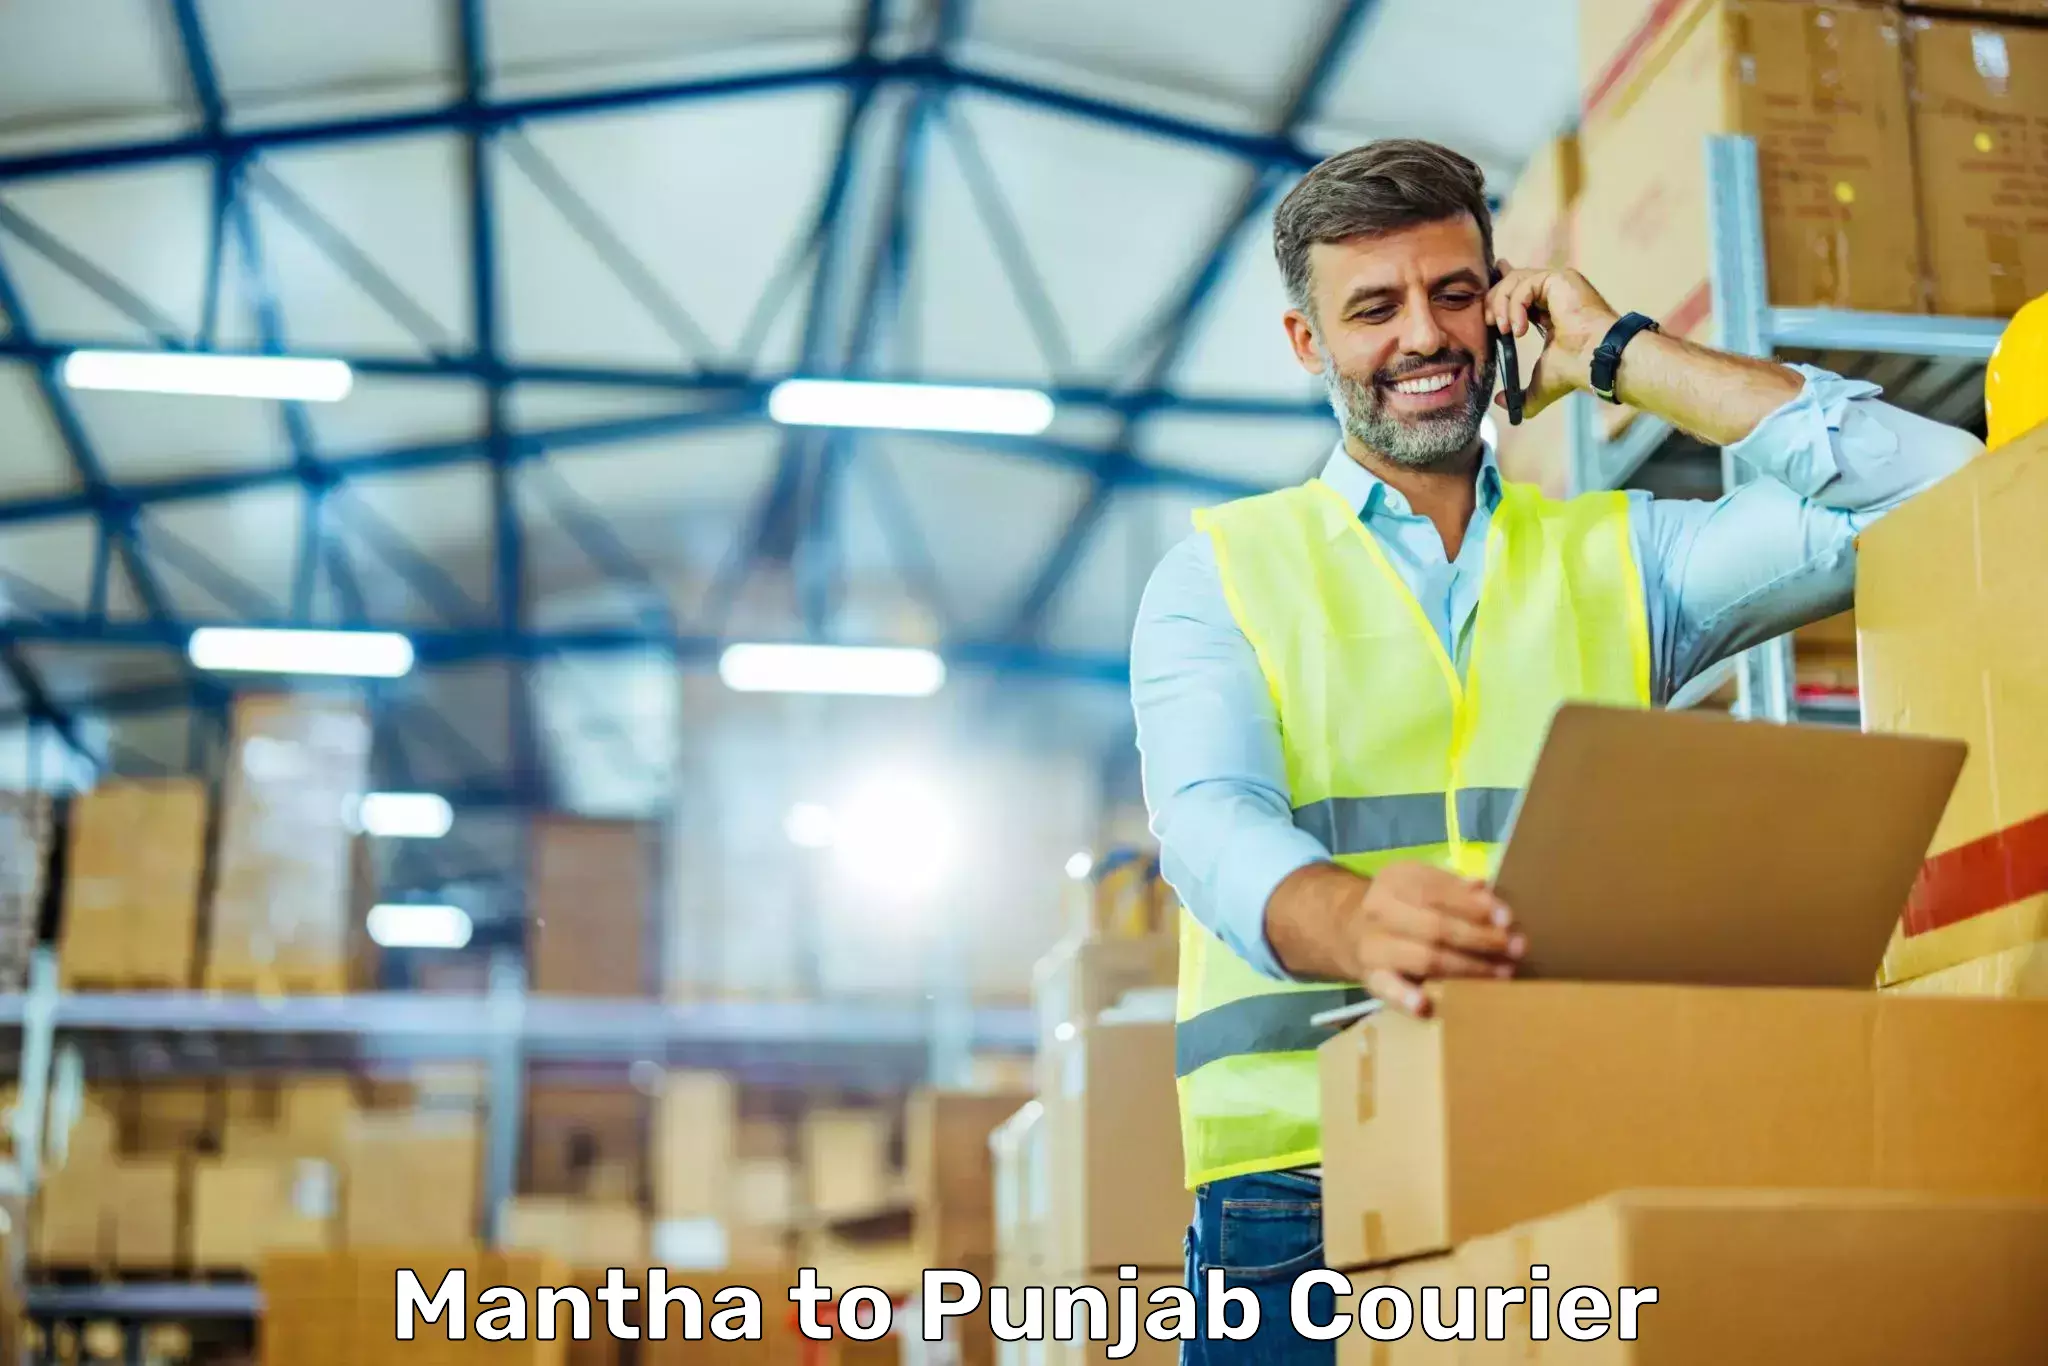 Reliable courier service Mantha to Punjab